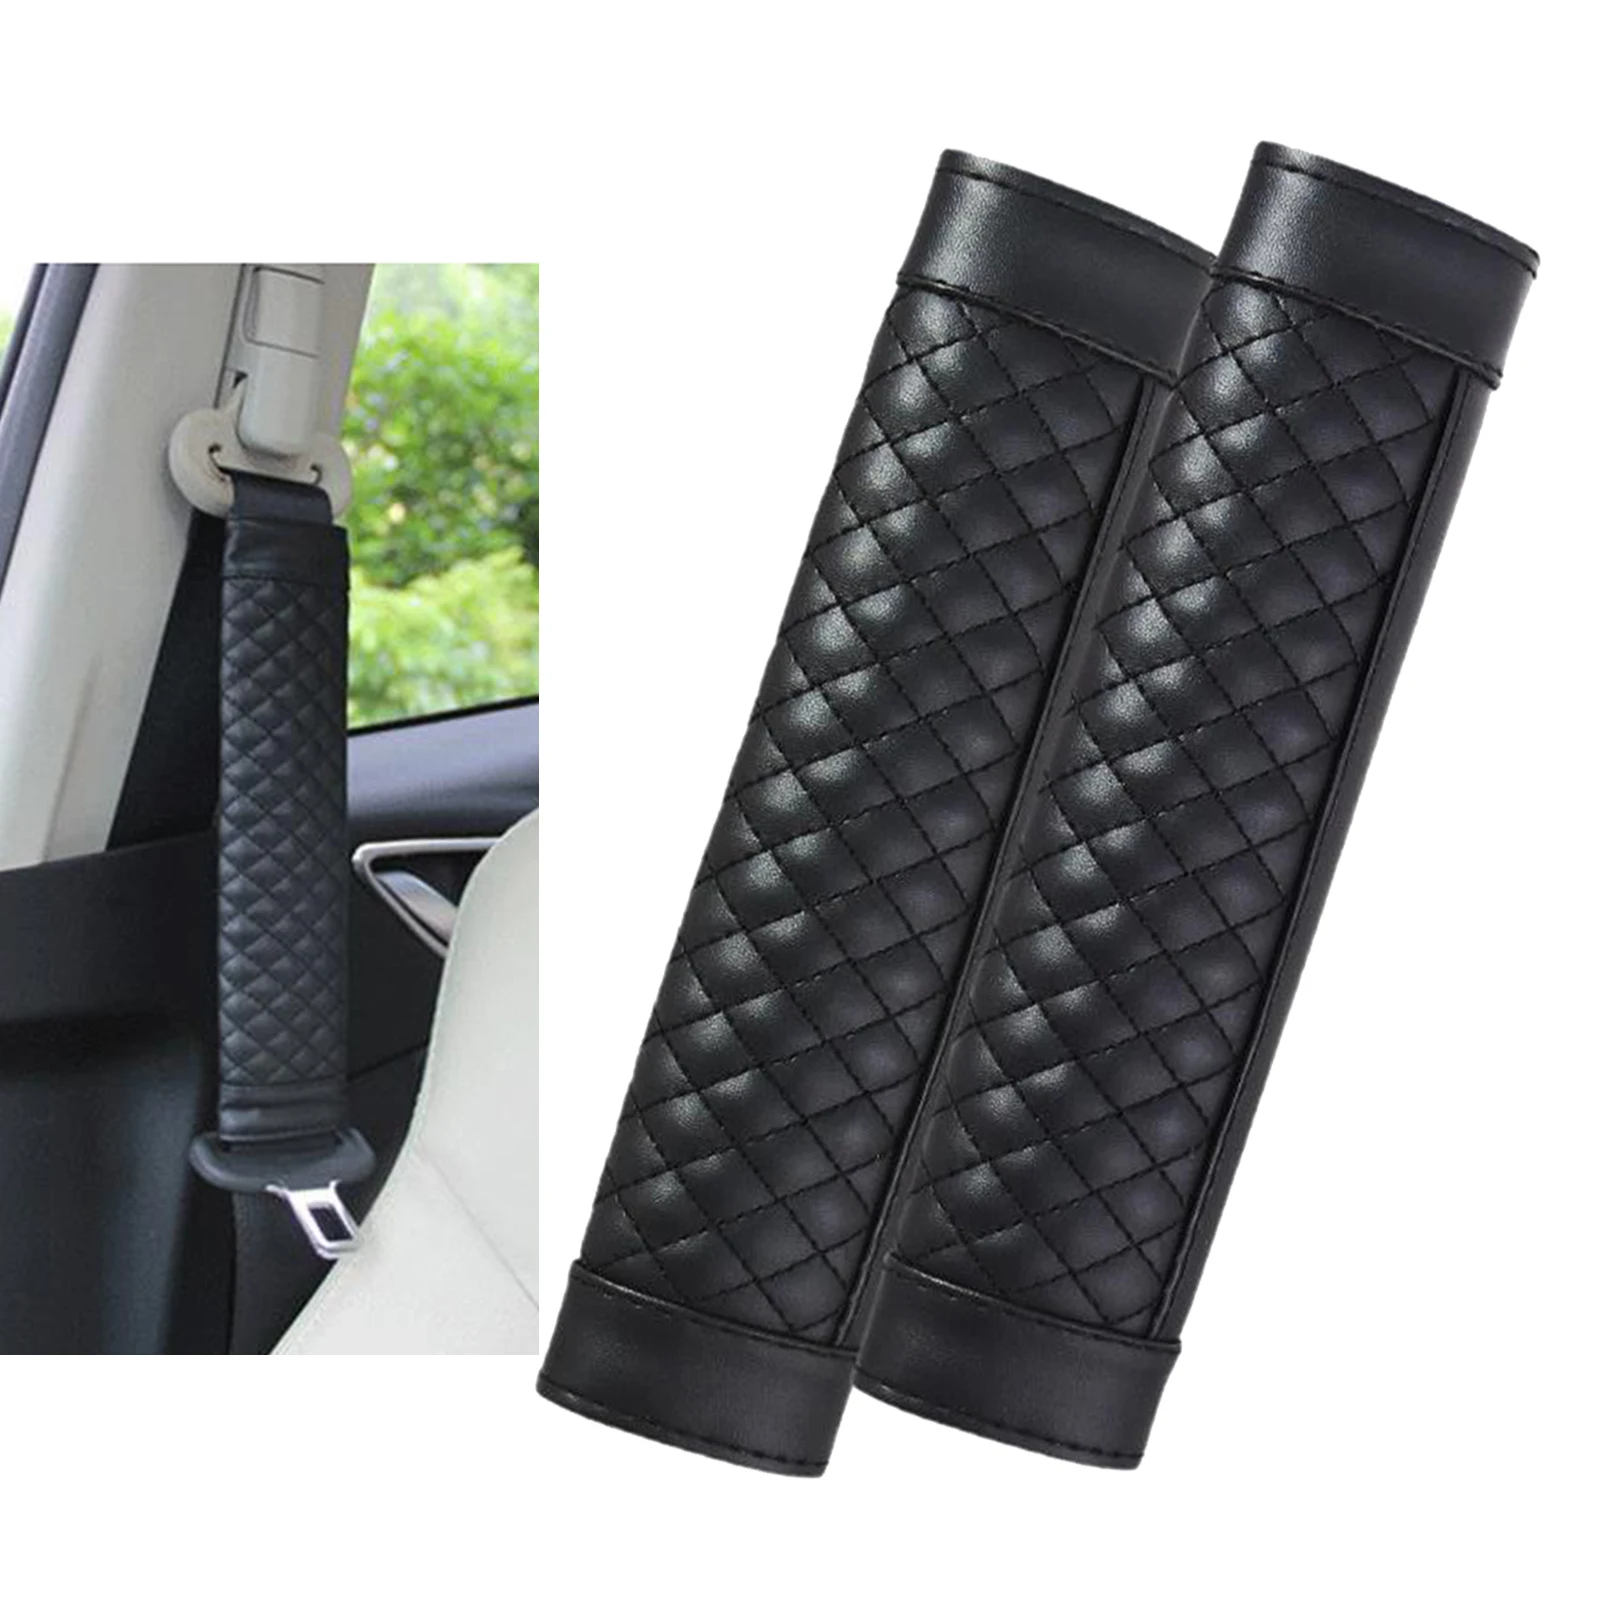 1Pair Universal Auto Car PU Leather Seatbelt Safety Seat Belt Pads Bag Cover Protect You Neck